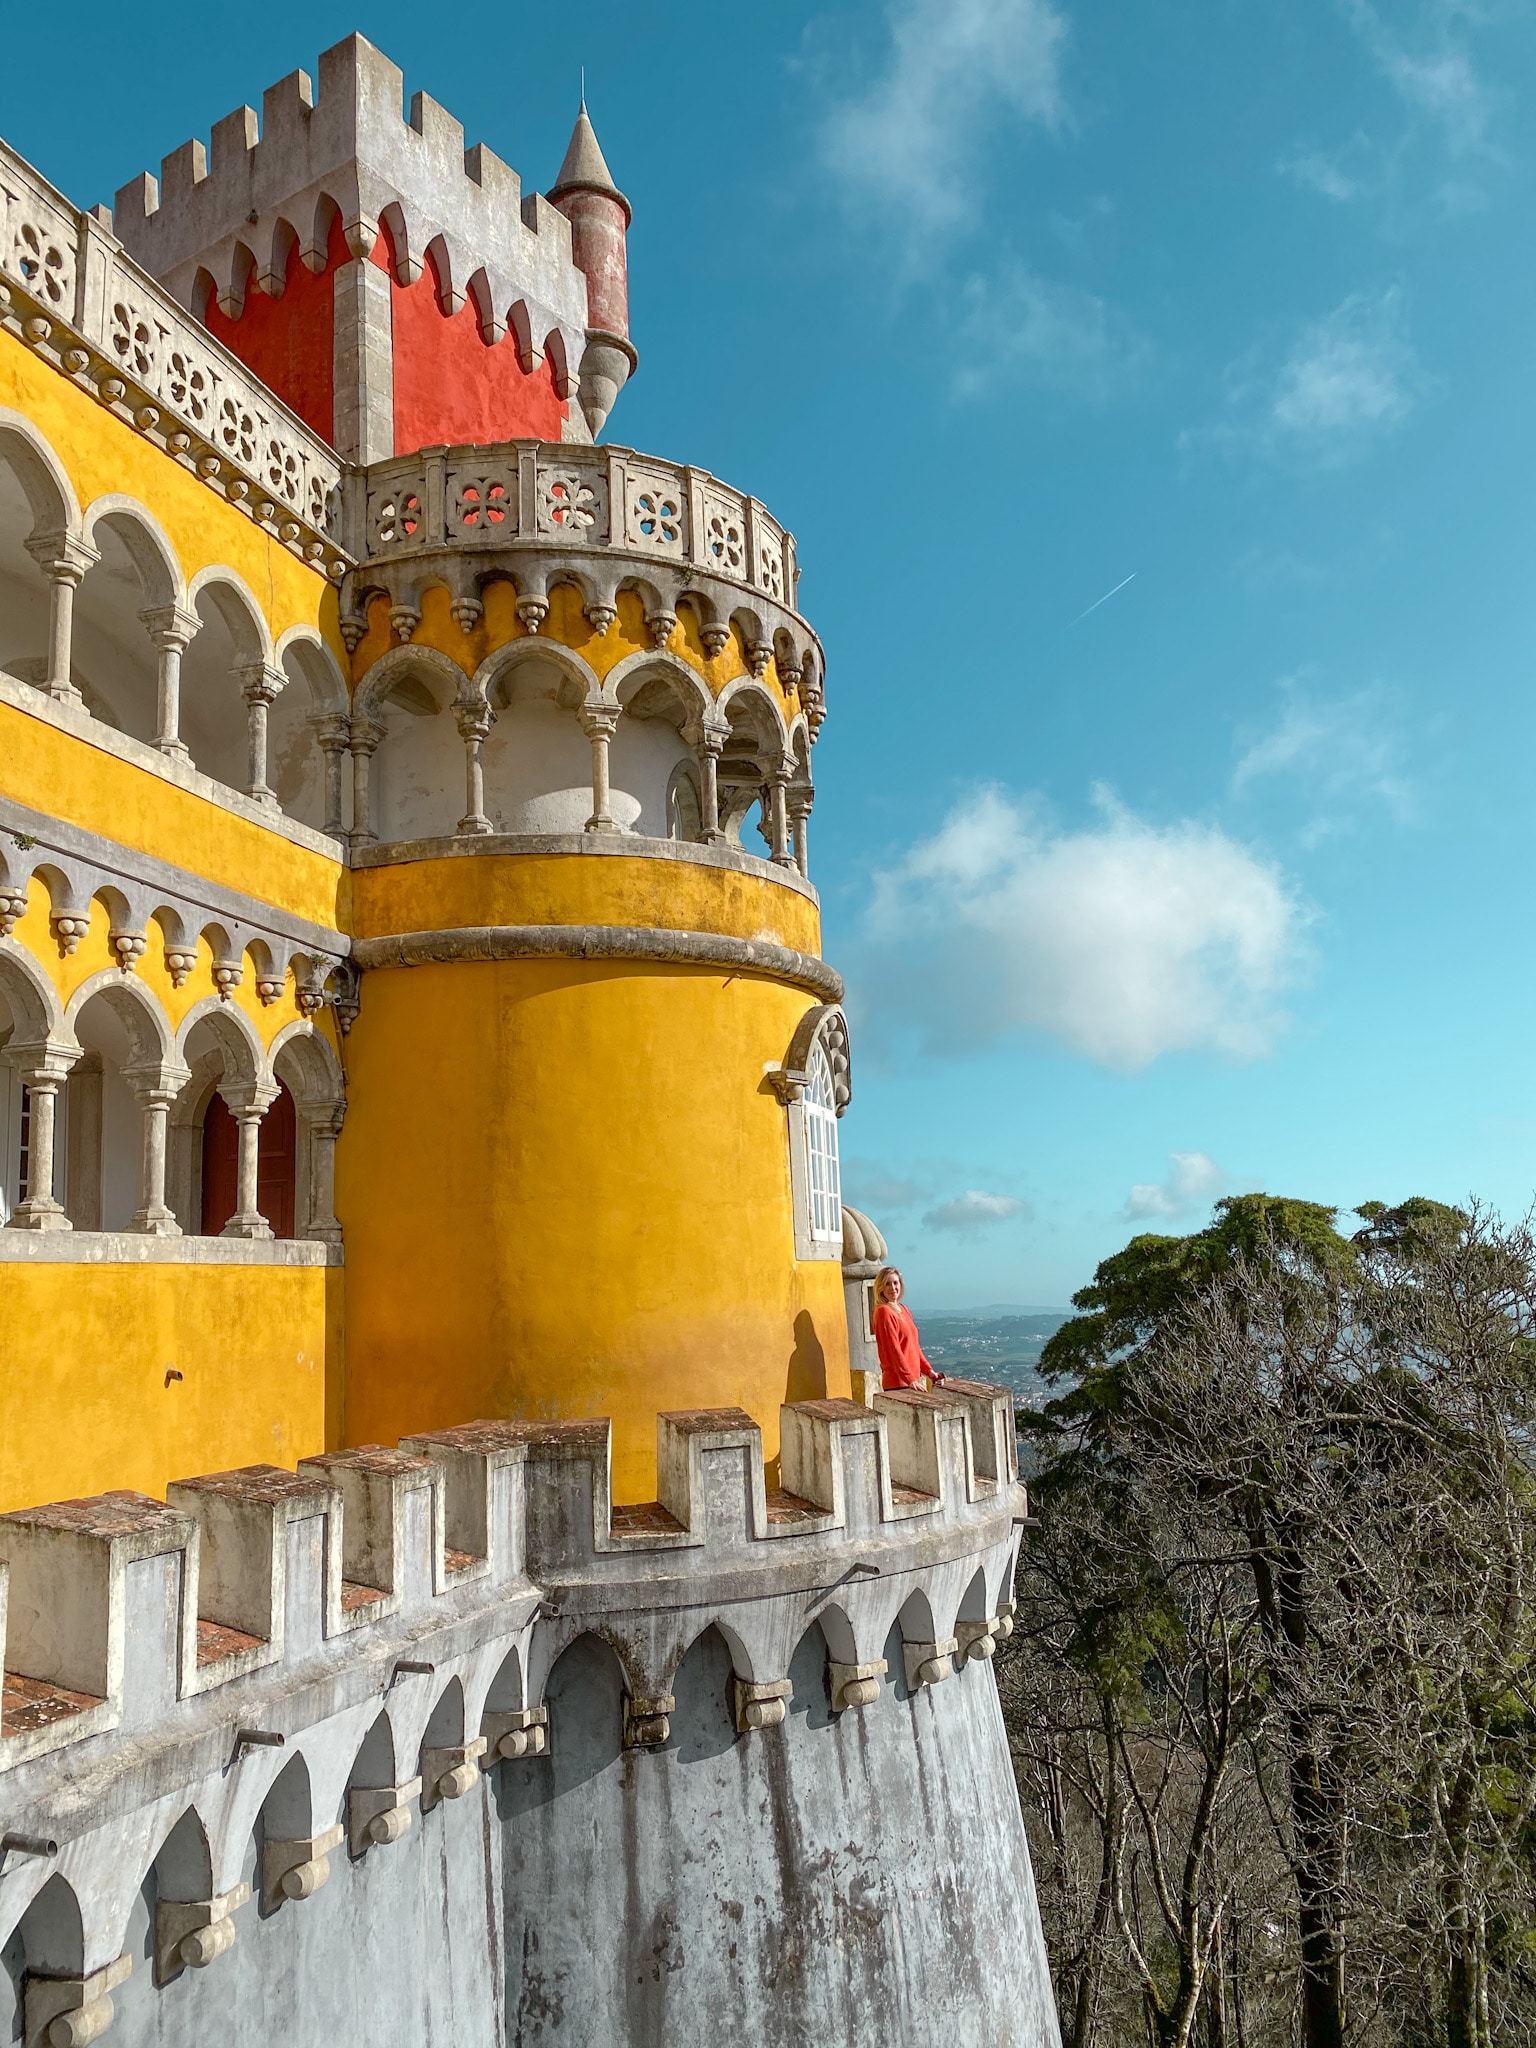 Erinn at Pena Palace in Sintra, Portugal.